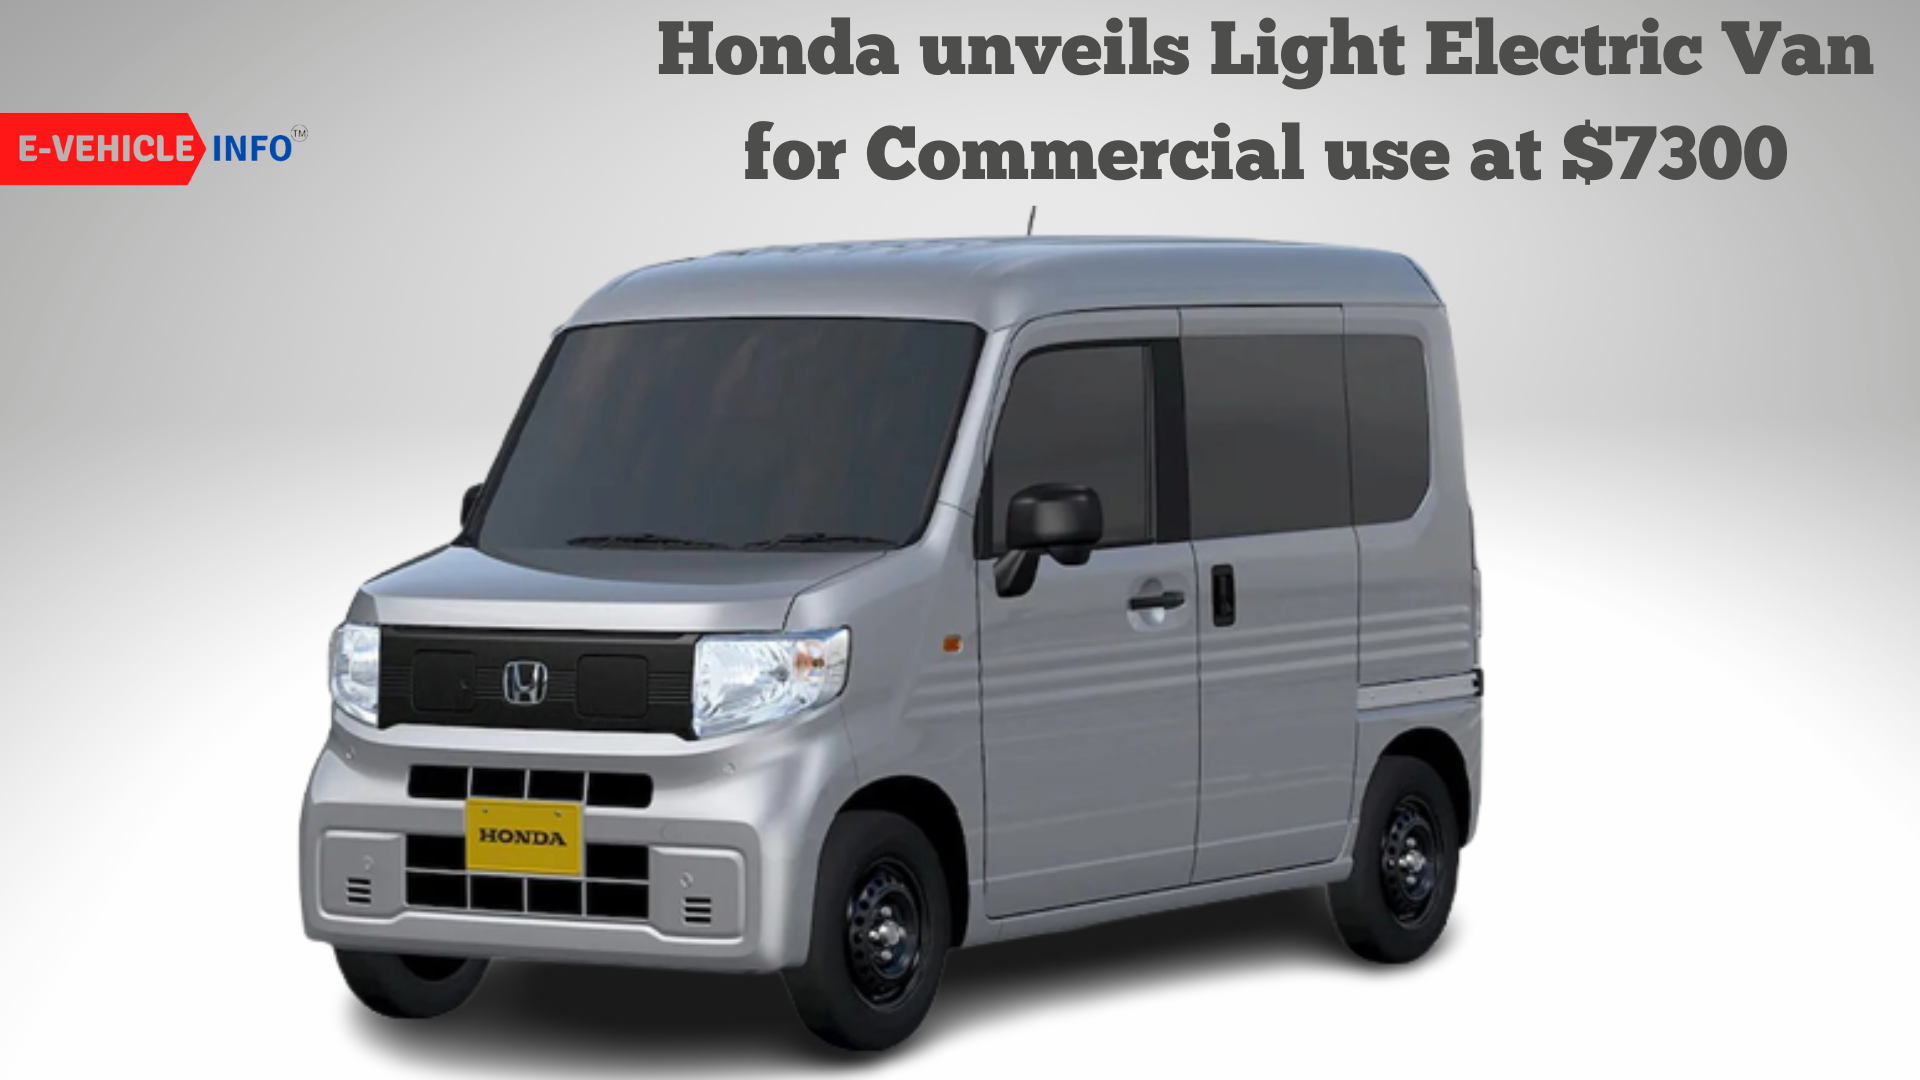 https://e-vehicleinfo.com/honda-unveils-light-electric-van-for-commercial-use-at-7300/